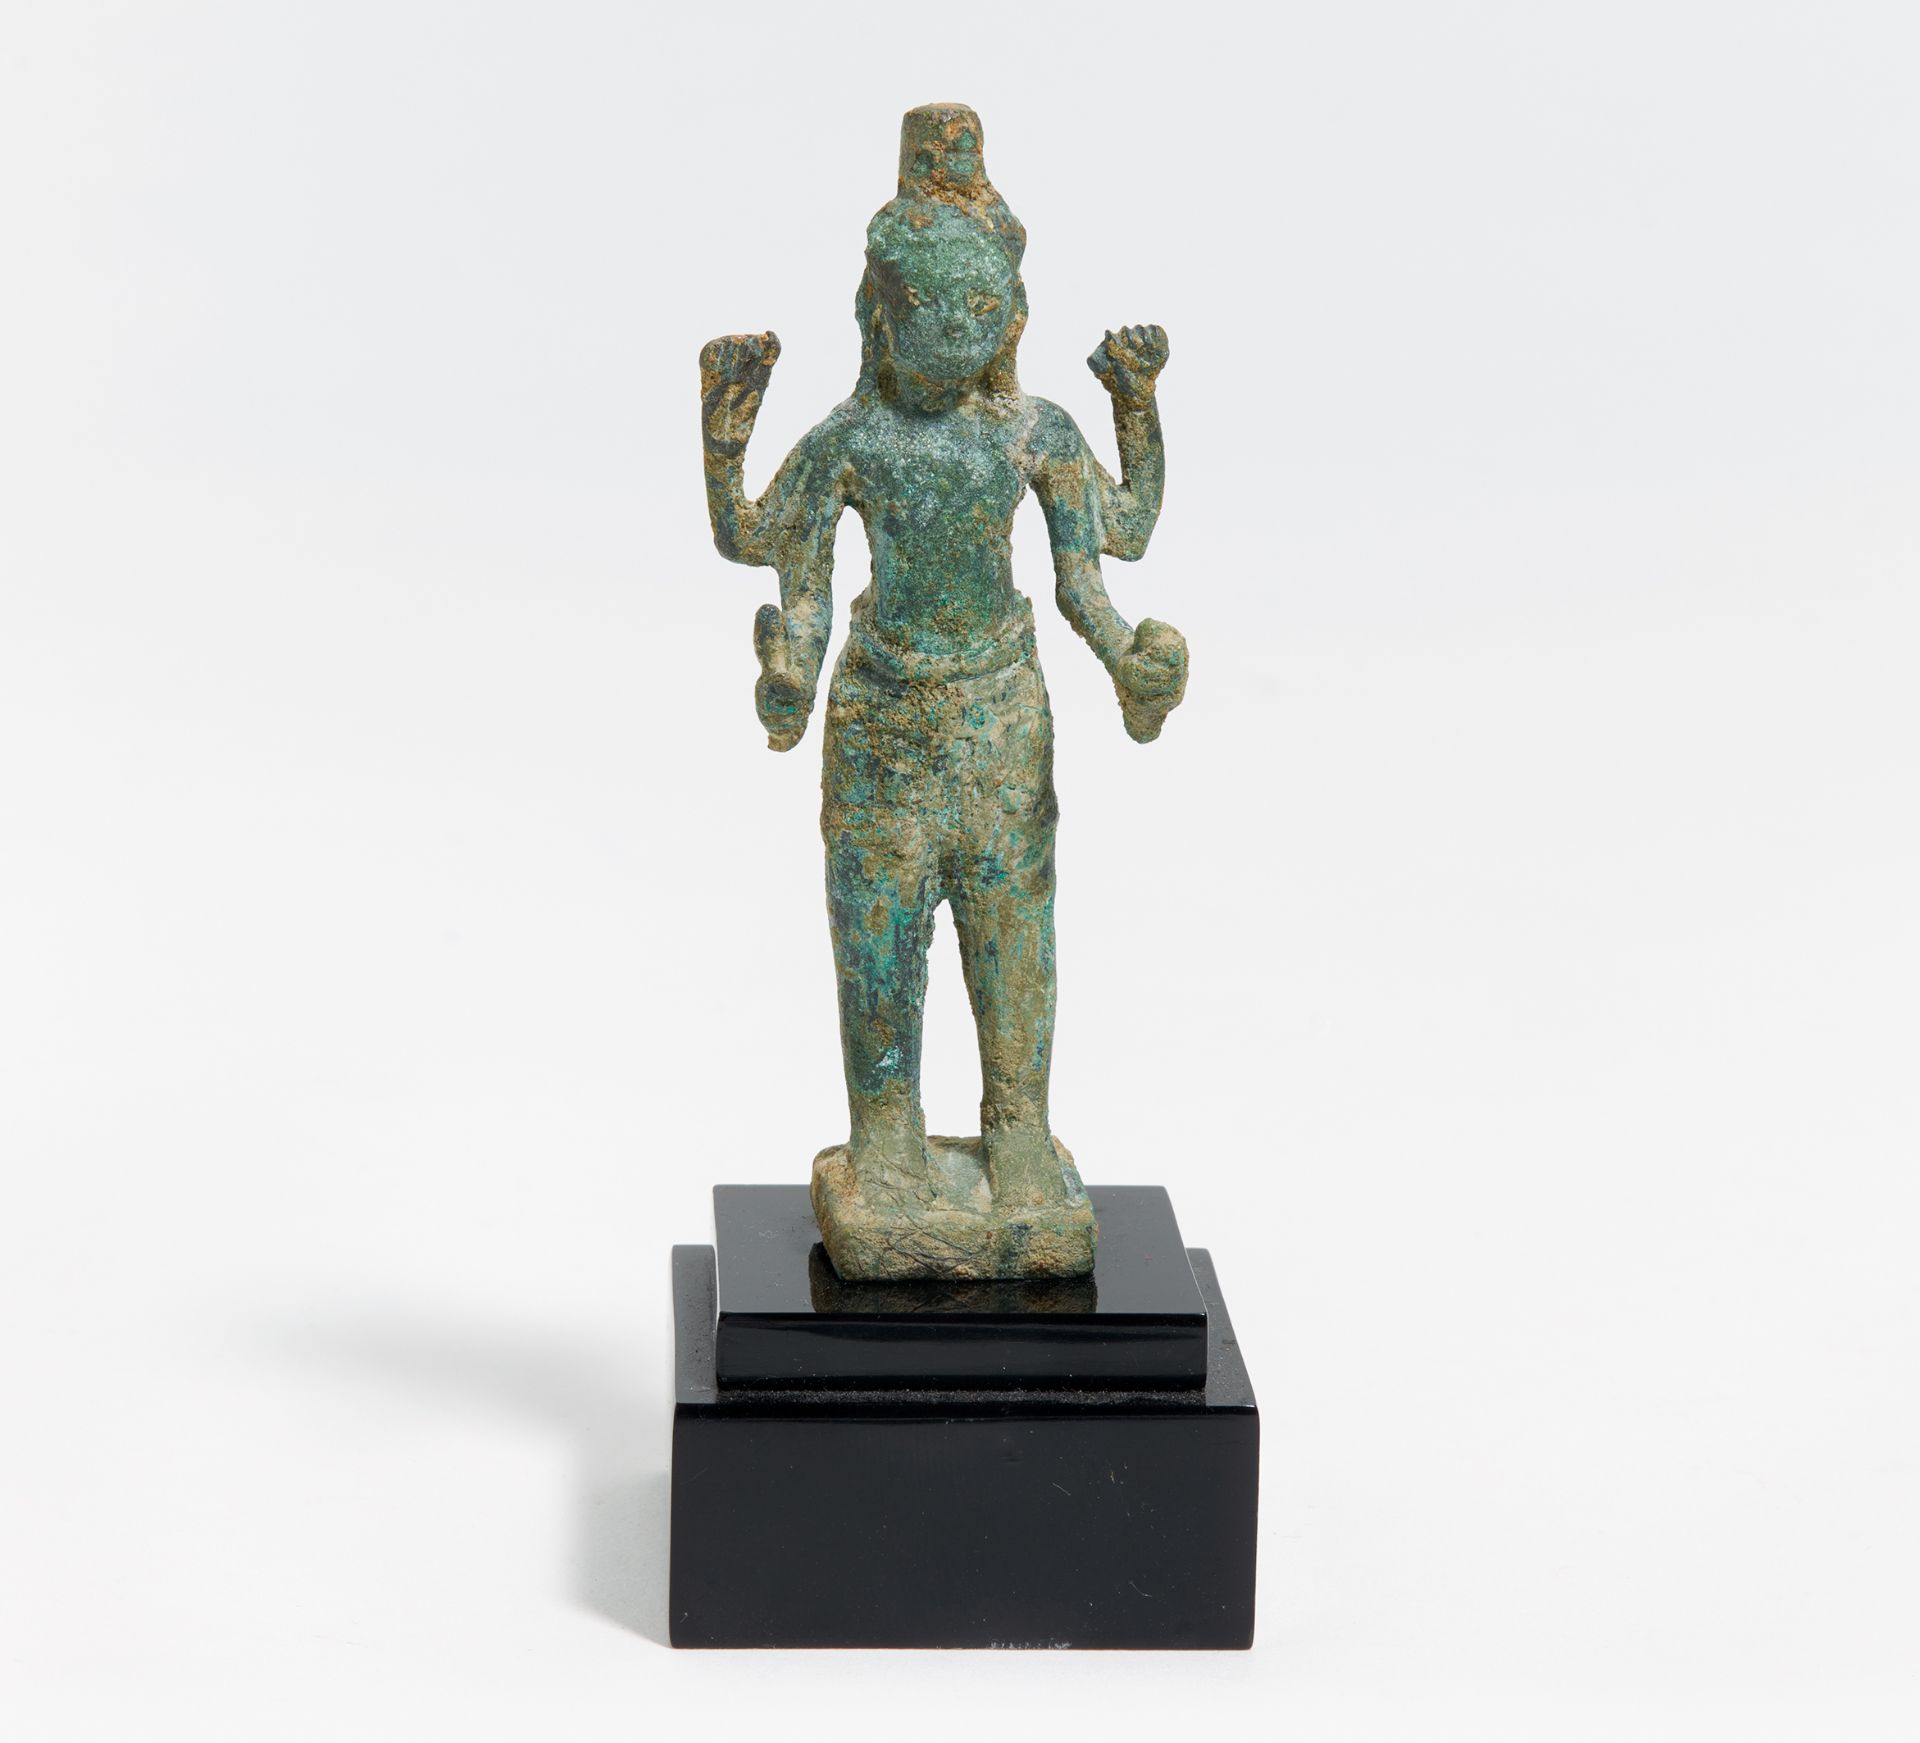 SMALL FIGURE OF THE FOURARMED VISHNU. Khmer. Angkor period. Ca. 12th/13th c. Bronze with green